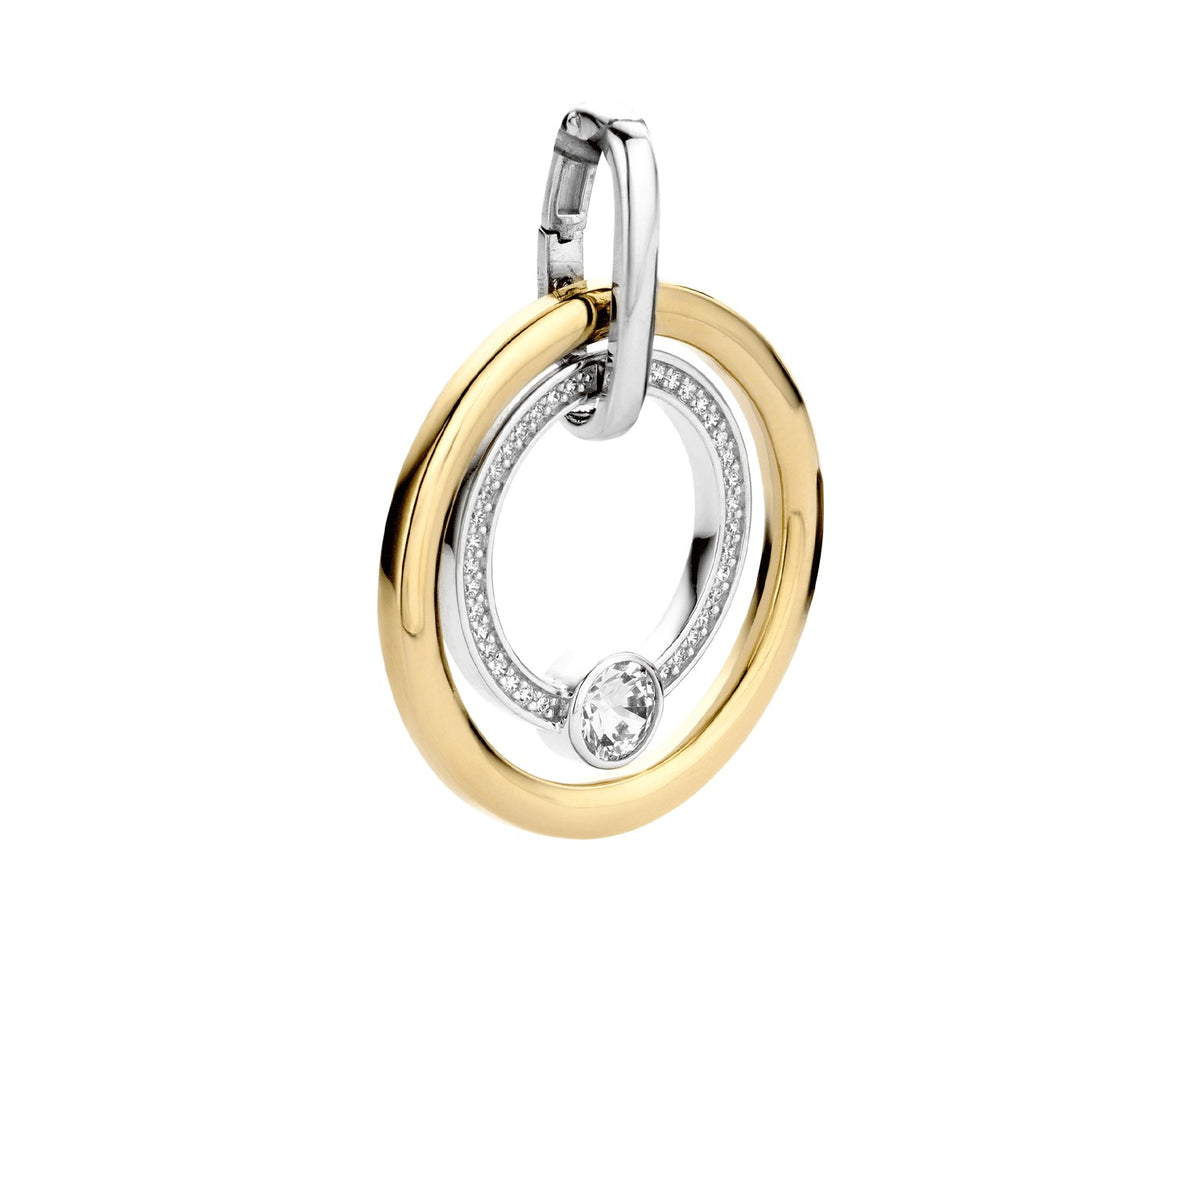 TI SENTO Sterling Silver Two Tone Double Circle Pendant with Cubic Zirconias